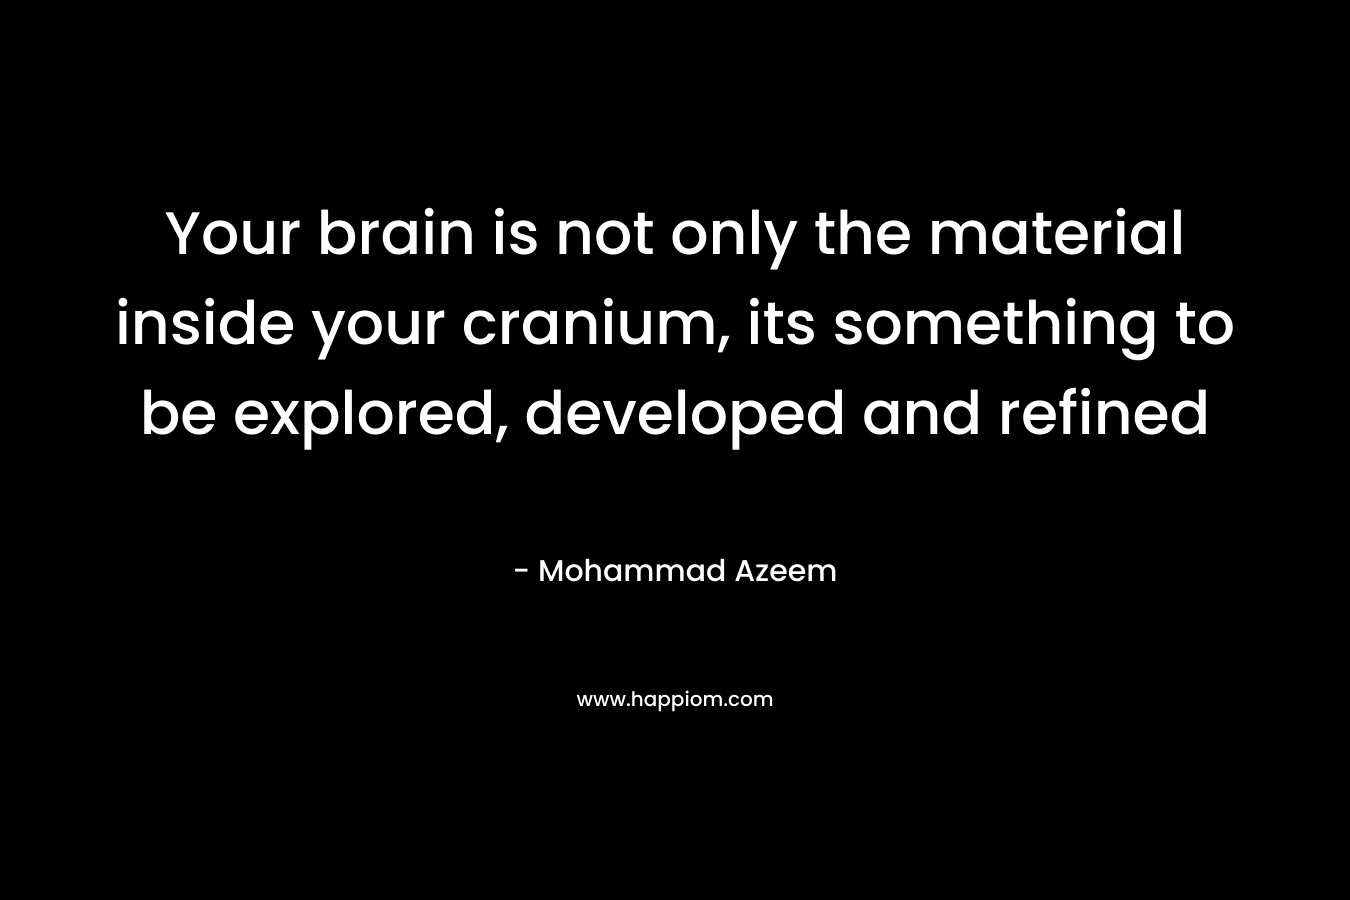 Your brain is not only the material inside your cranium, its something to be explored, developed and refined – Mohammad Azeem